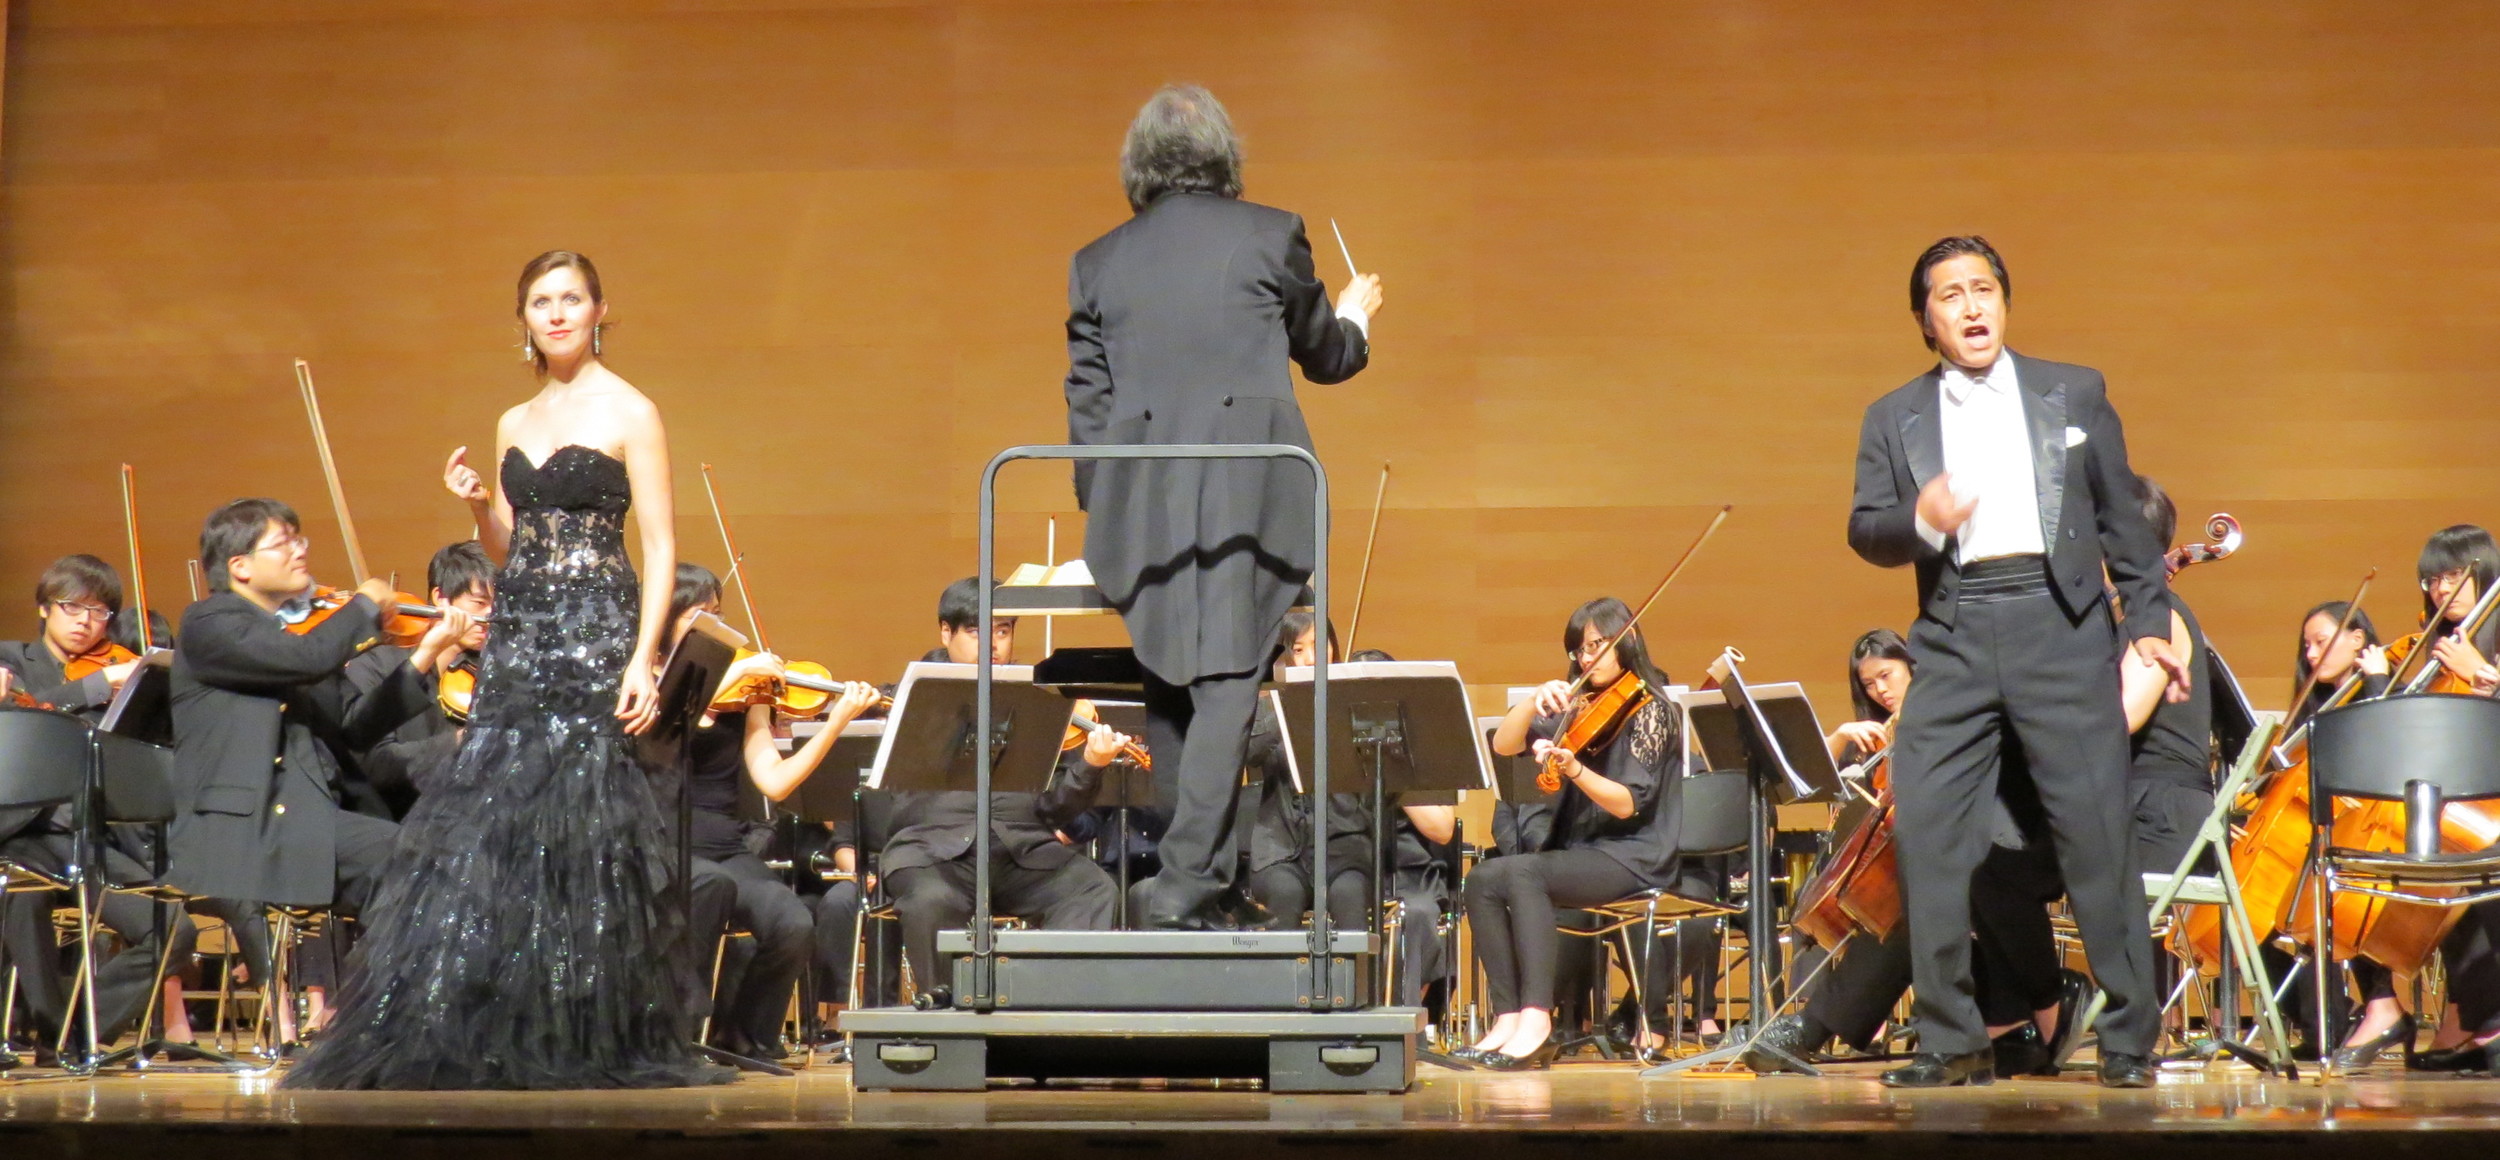  With Taitung University Orchestra (Prof. Shieh conducting, Prof. Yang, Tenor), 2014. 